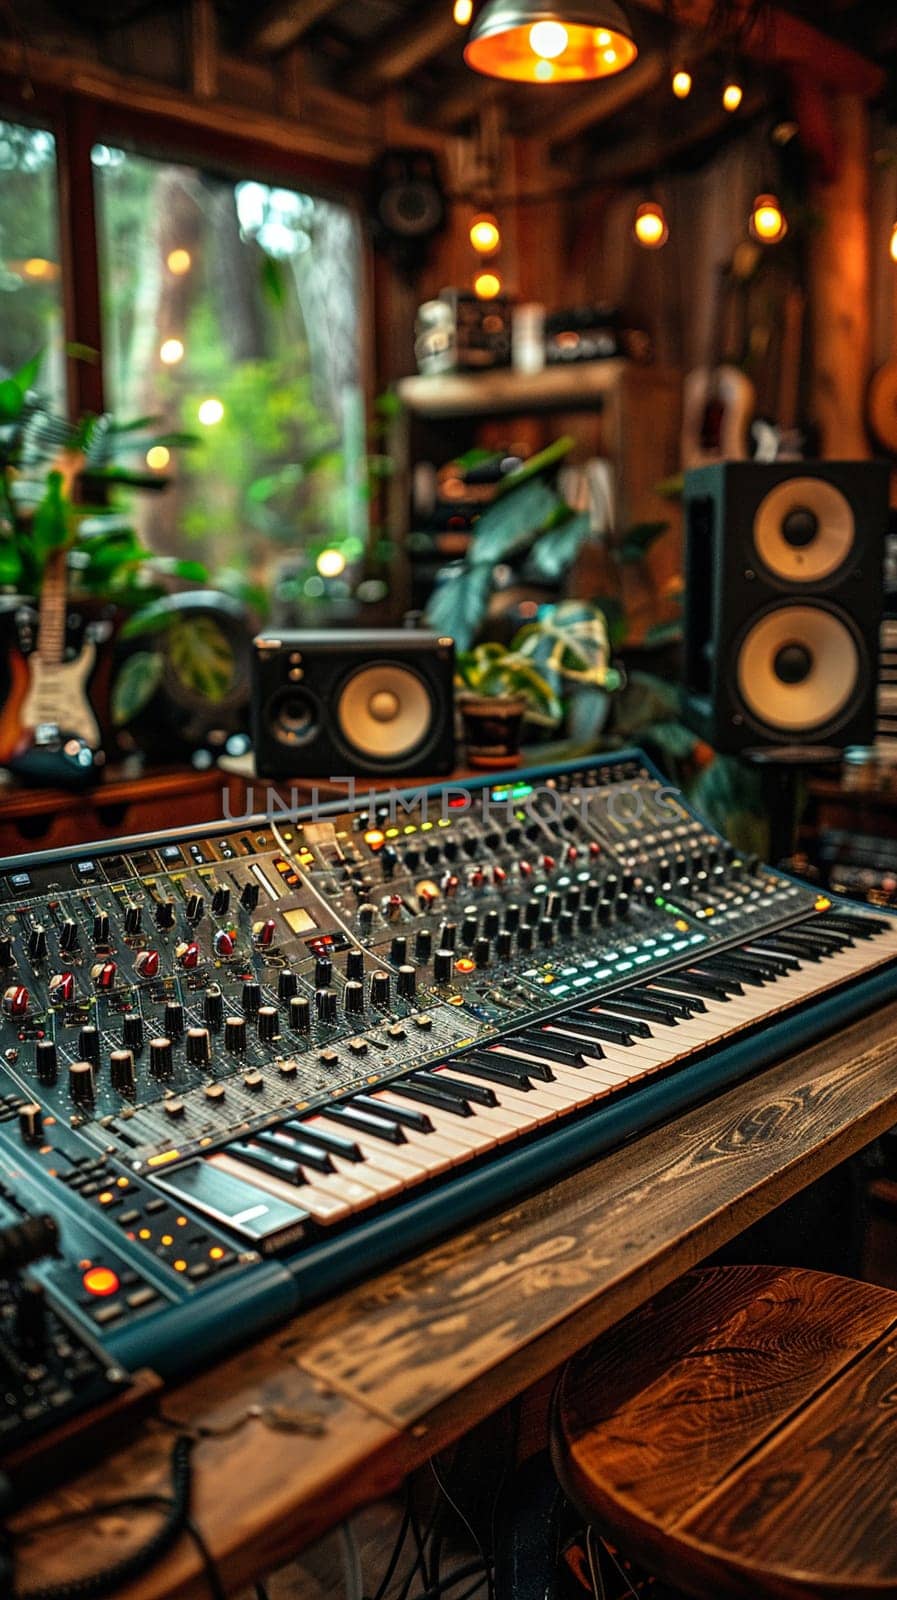 Recording Studio Captures the Harmony of Sound in Business of Music Production, Mixing consoles and headphone sets record a story of rhythm and harmony in the music production business.